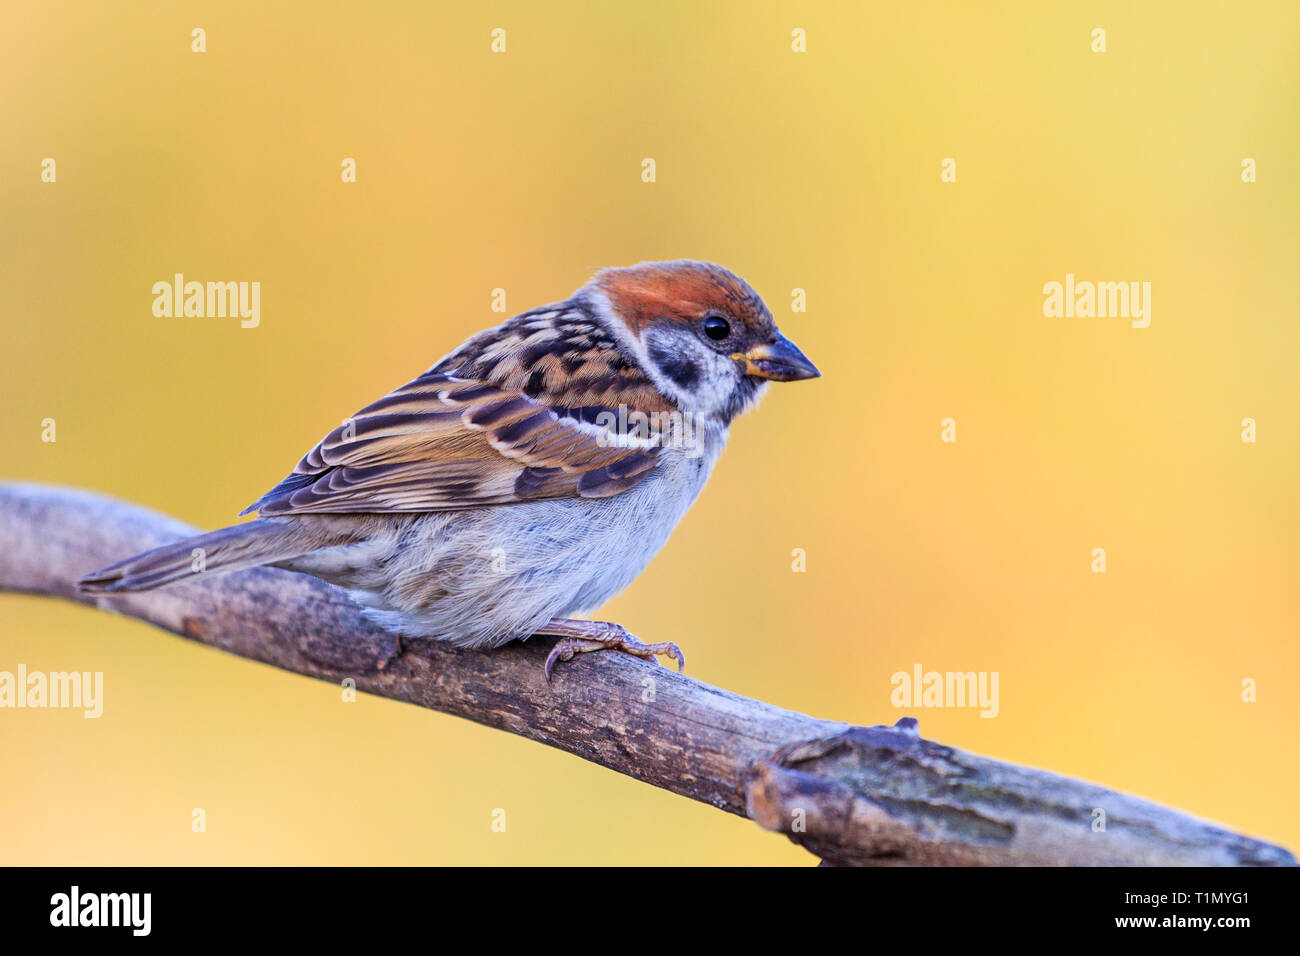 sparrow sitting on a branch on a yellow background Stock Photo